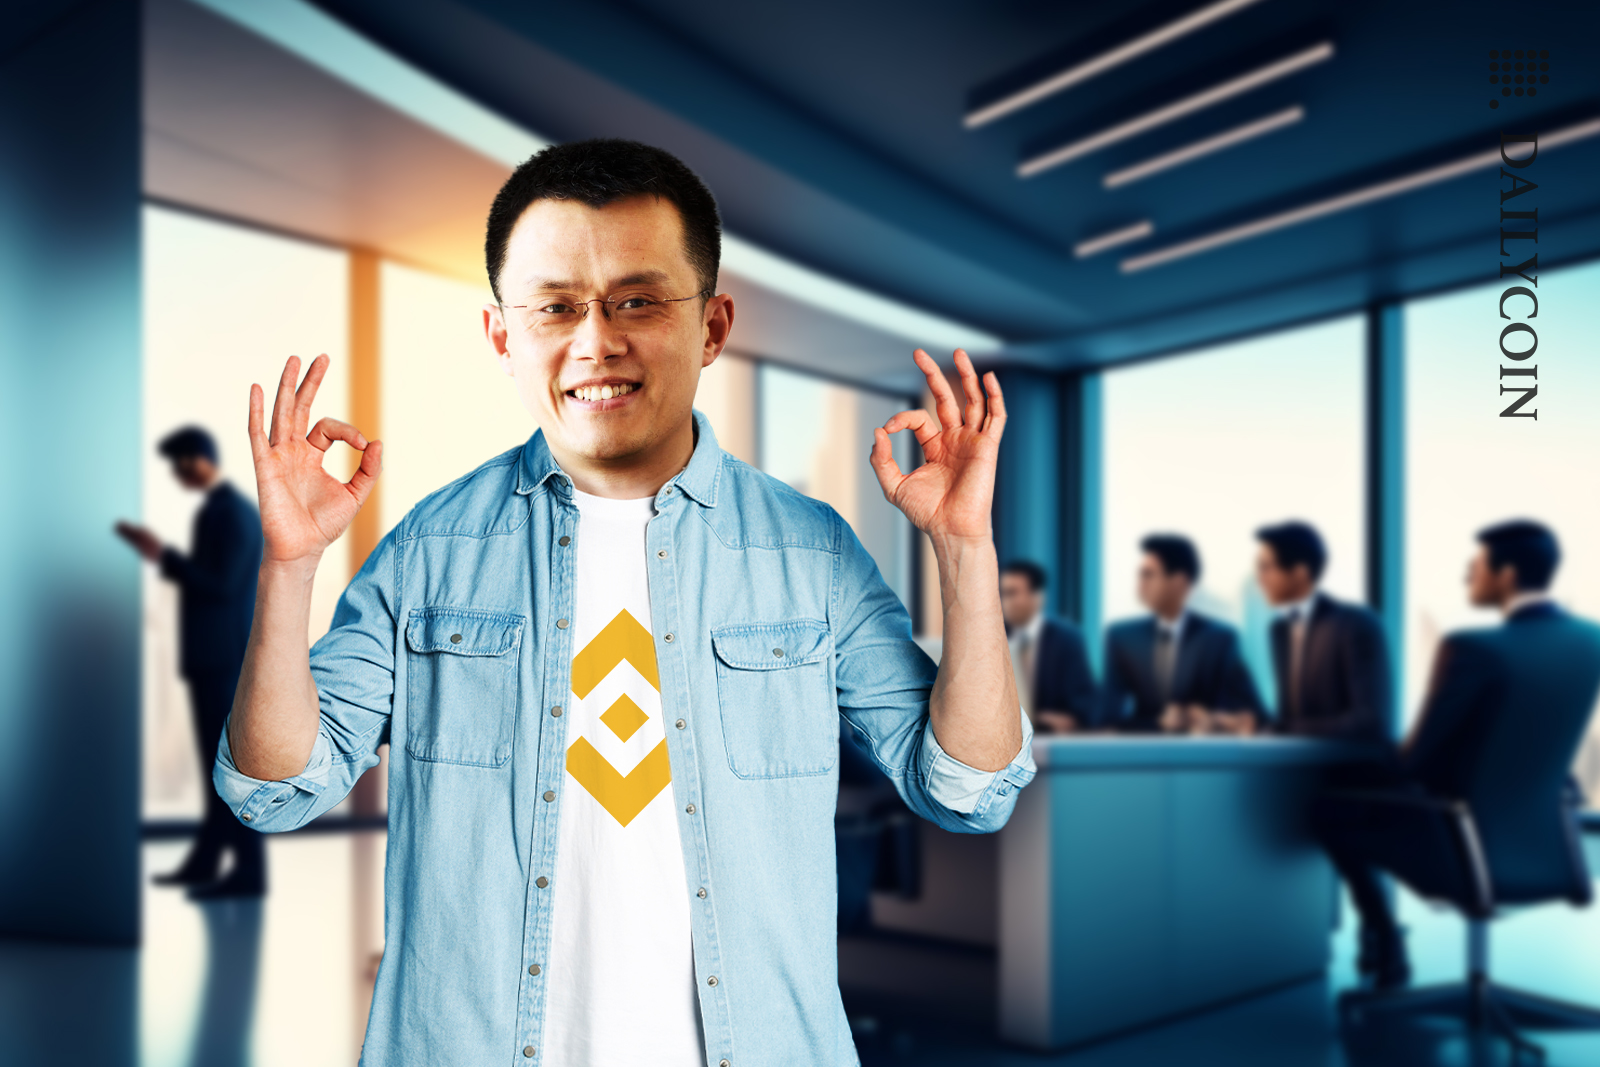 Binance CEO Changpeng Zhao showing ok hands in a working office.